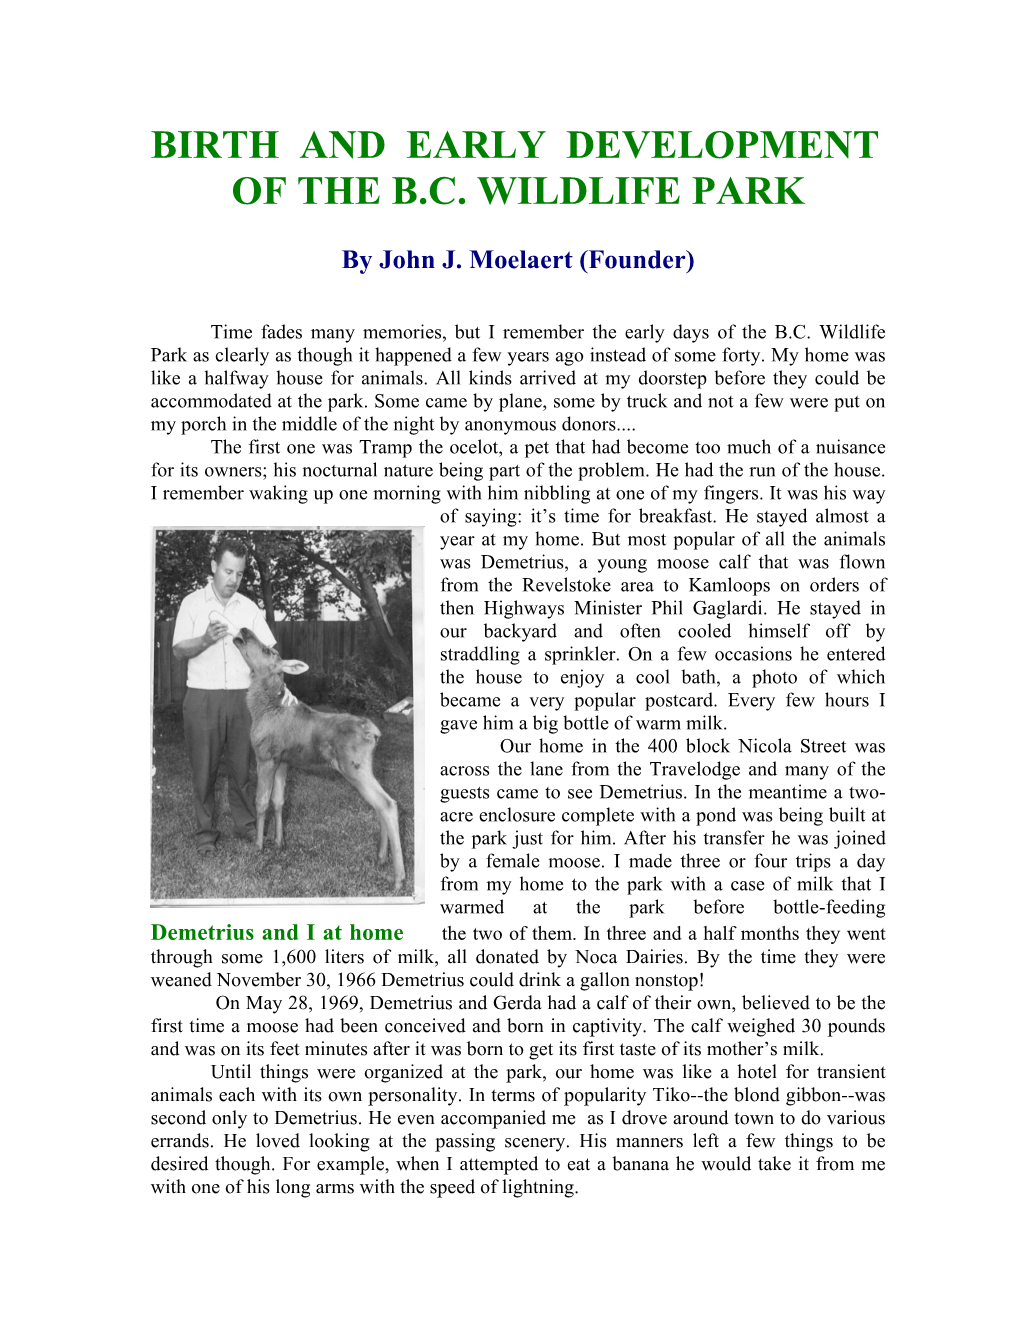 Birth and Early Development of the B.C. Wildlife Park